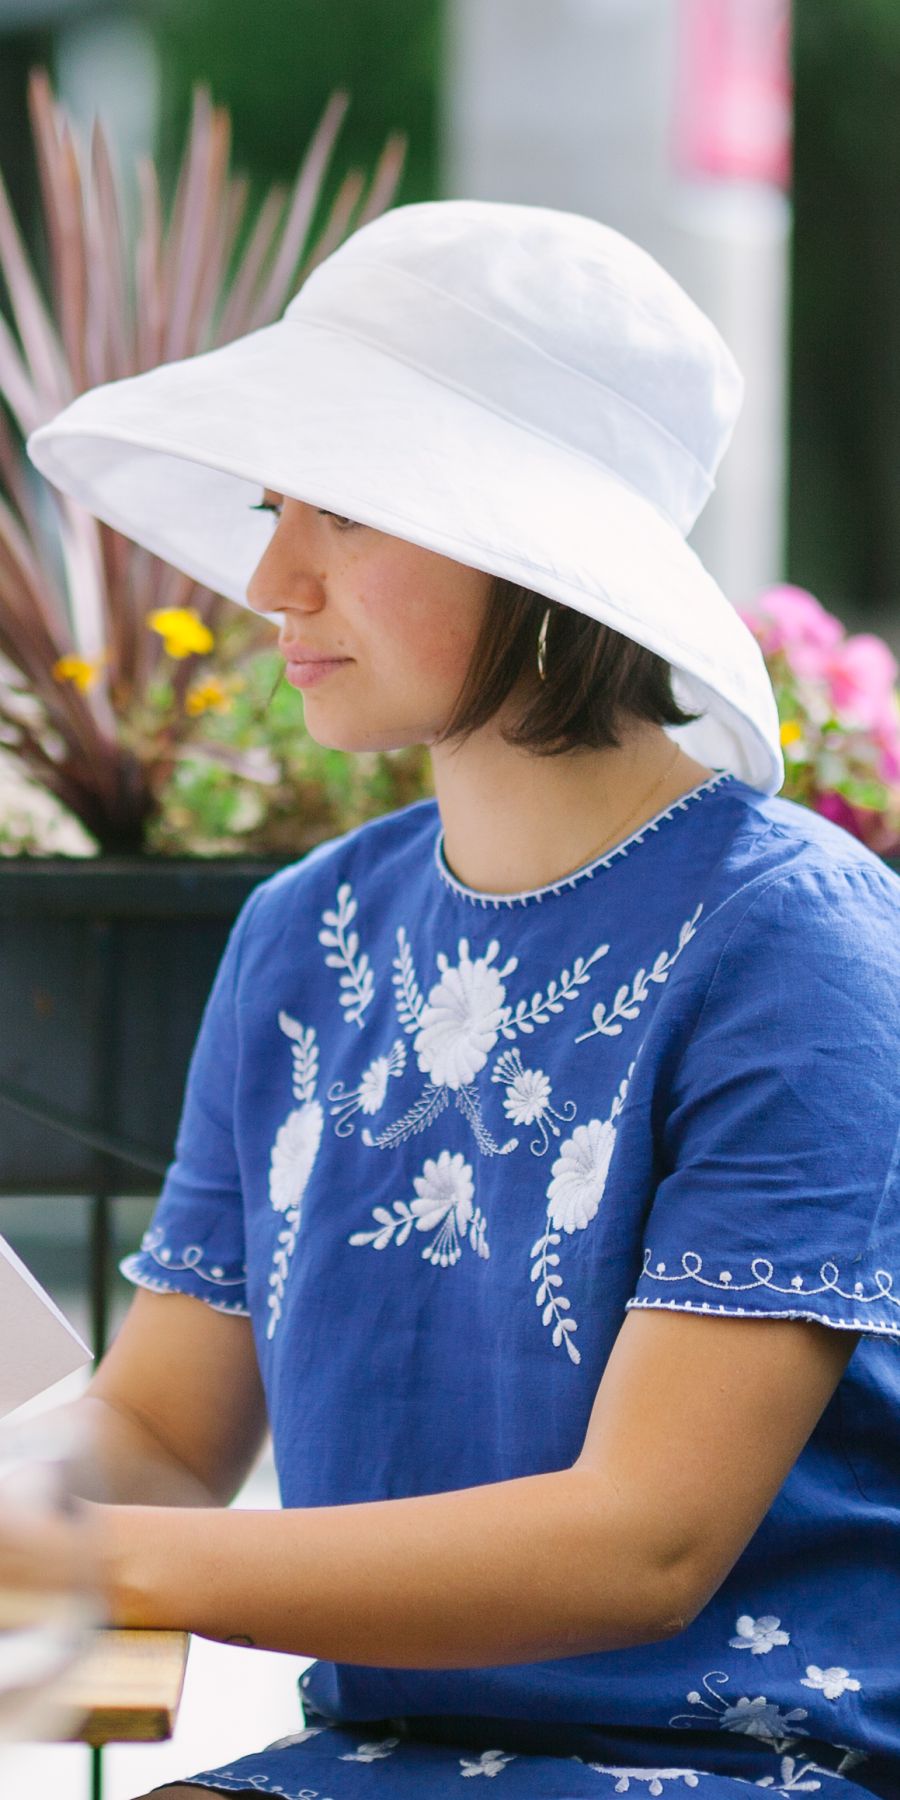 Linen Summer Hats Tested and Rated UPF50+ Sun Protection.  Choose from wide brim hats, buckets hats or ball caps.  Made in Canada